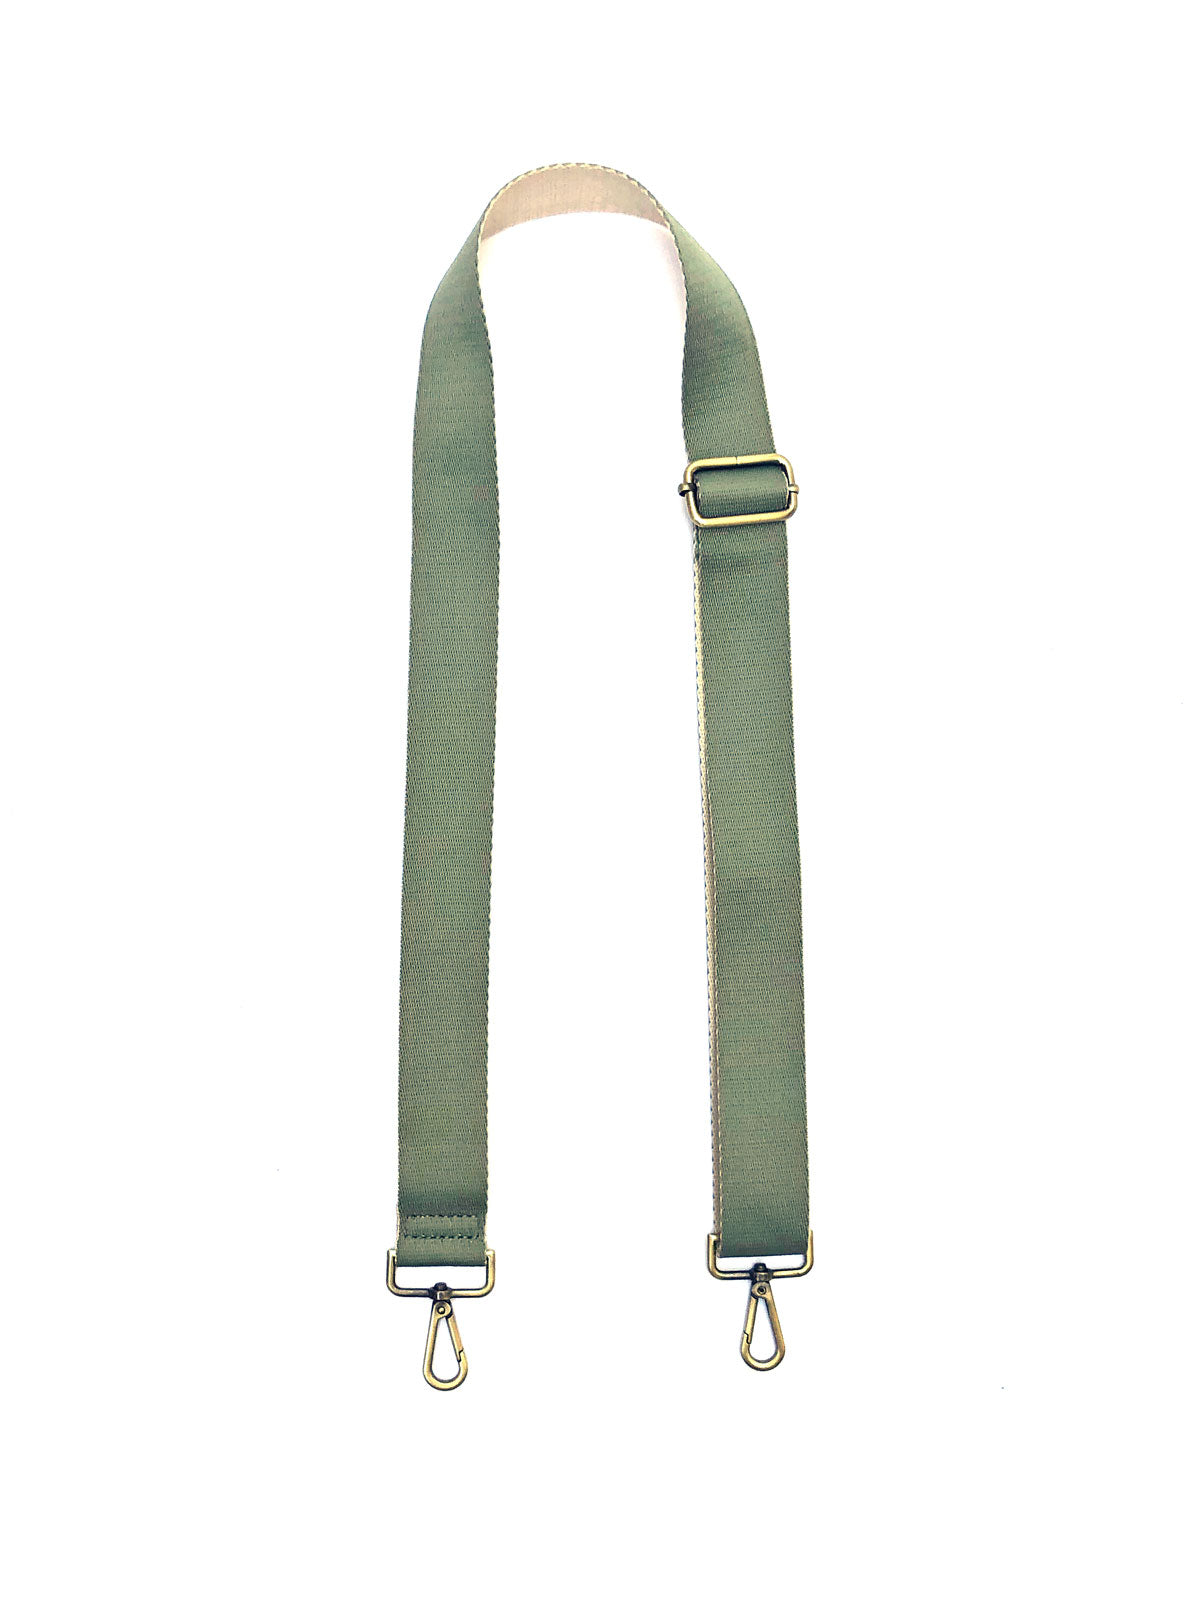 Solid Strap in Sage